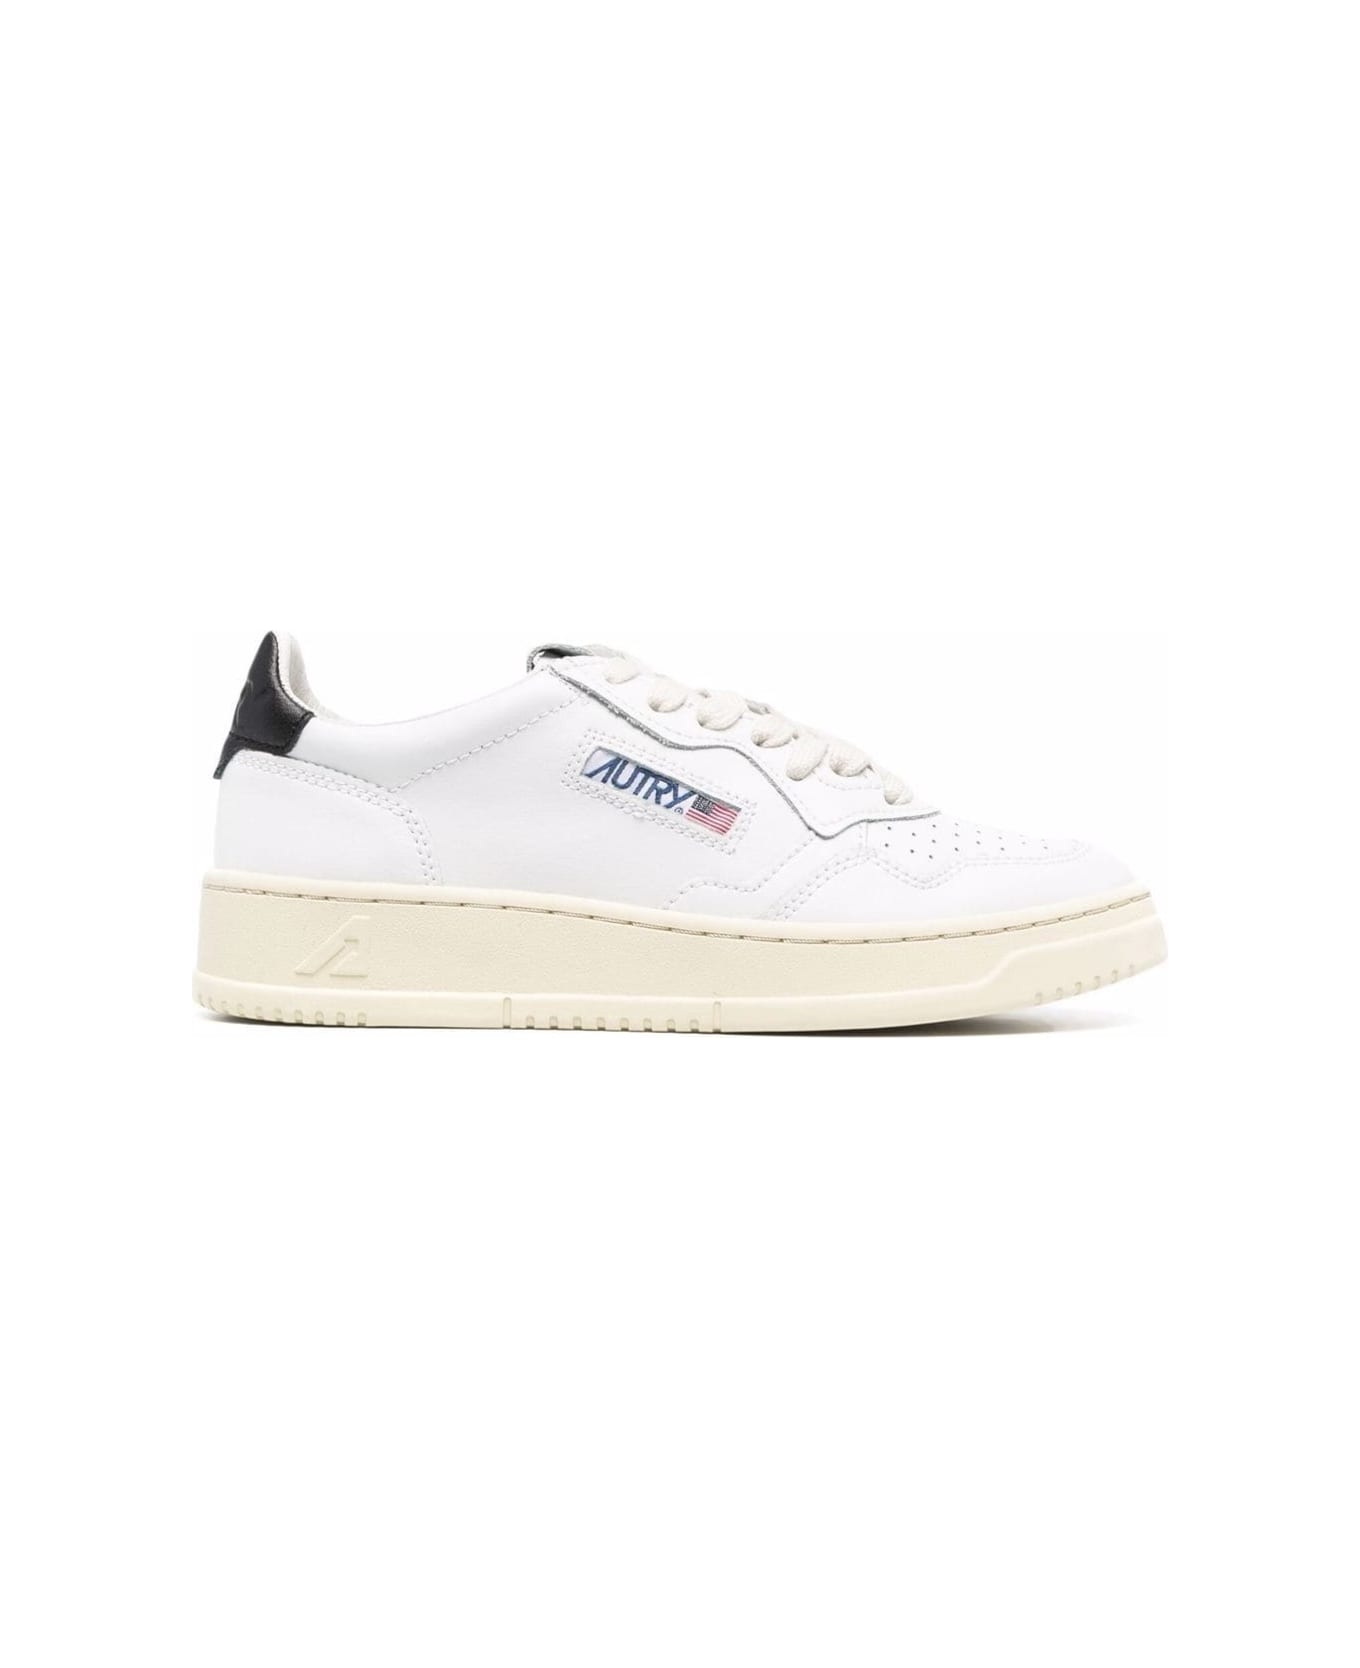 Autry Woman's White Leather Sneakers With Black Heel Tab - White